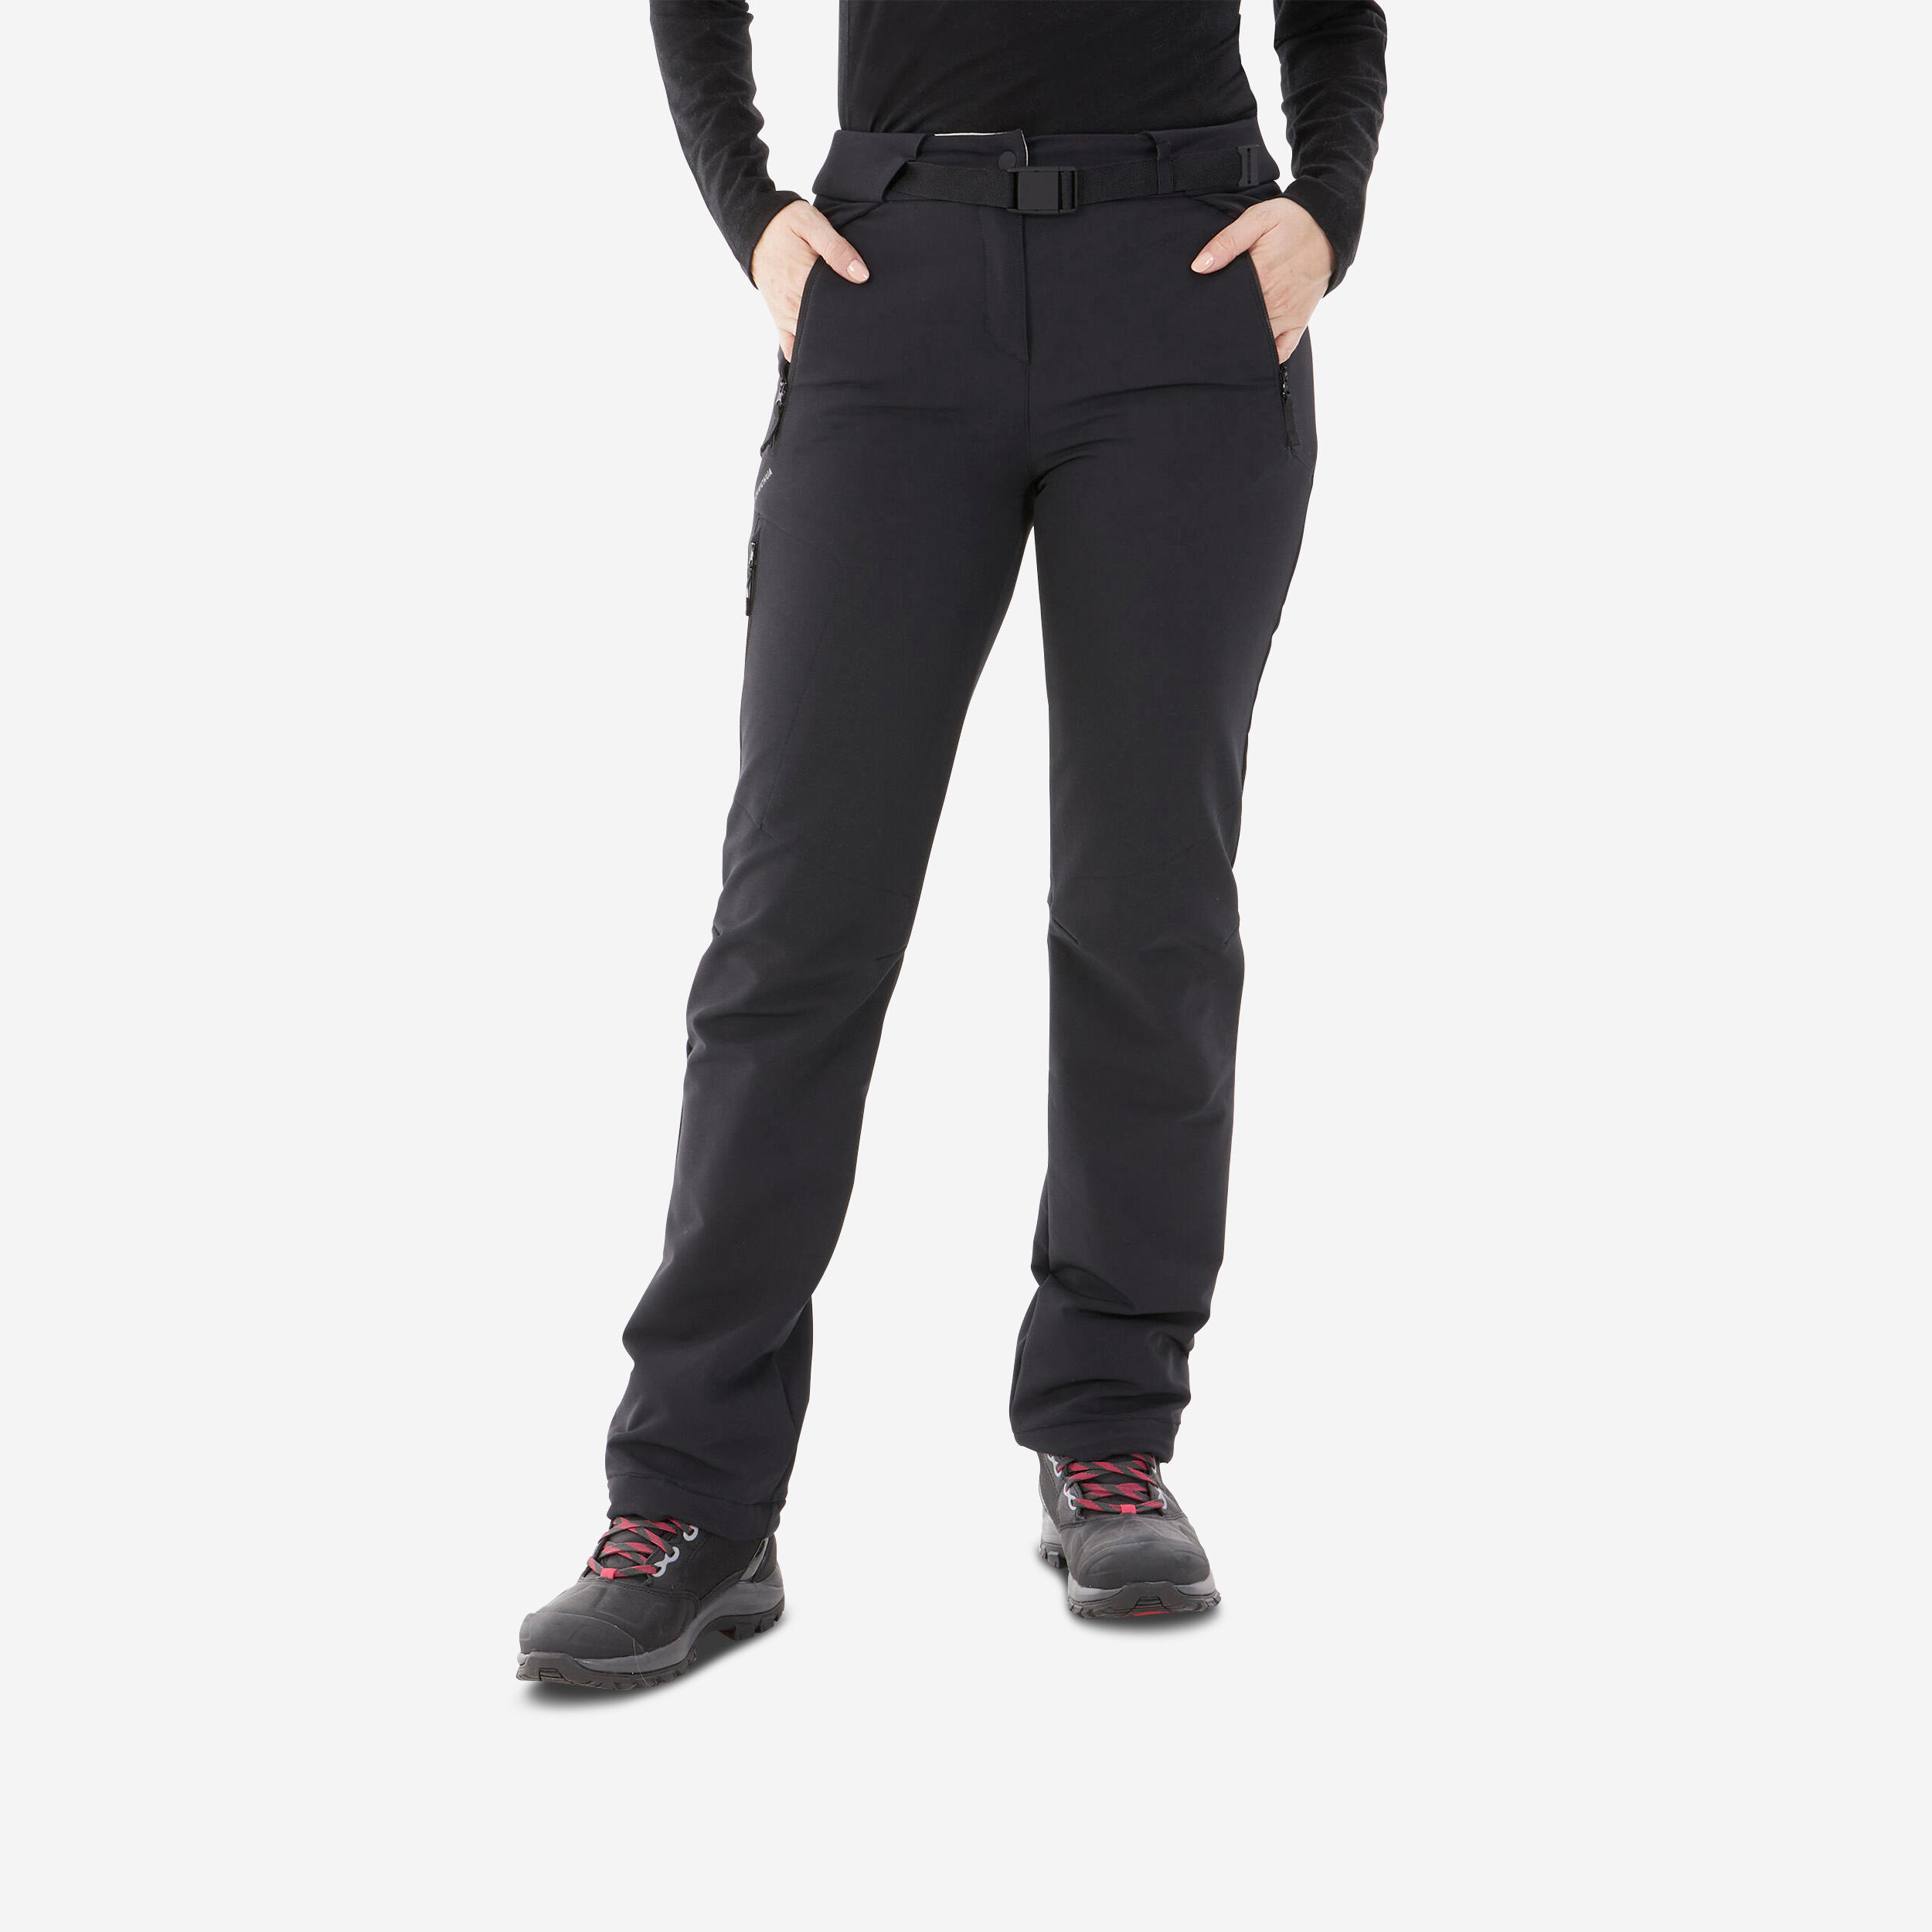 Women's warm water-repellent ventilated hiking trousers - SH500 MOUNTAIN  VENTIL